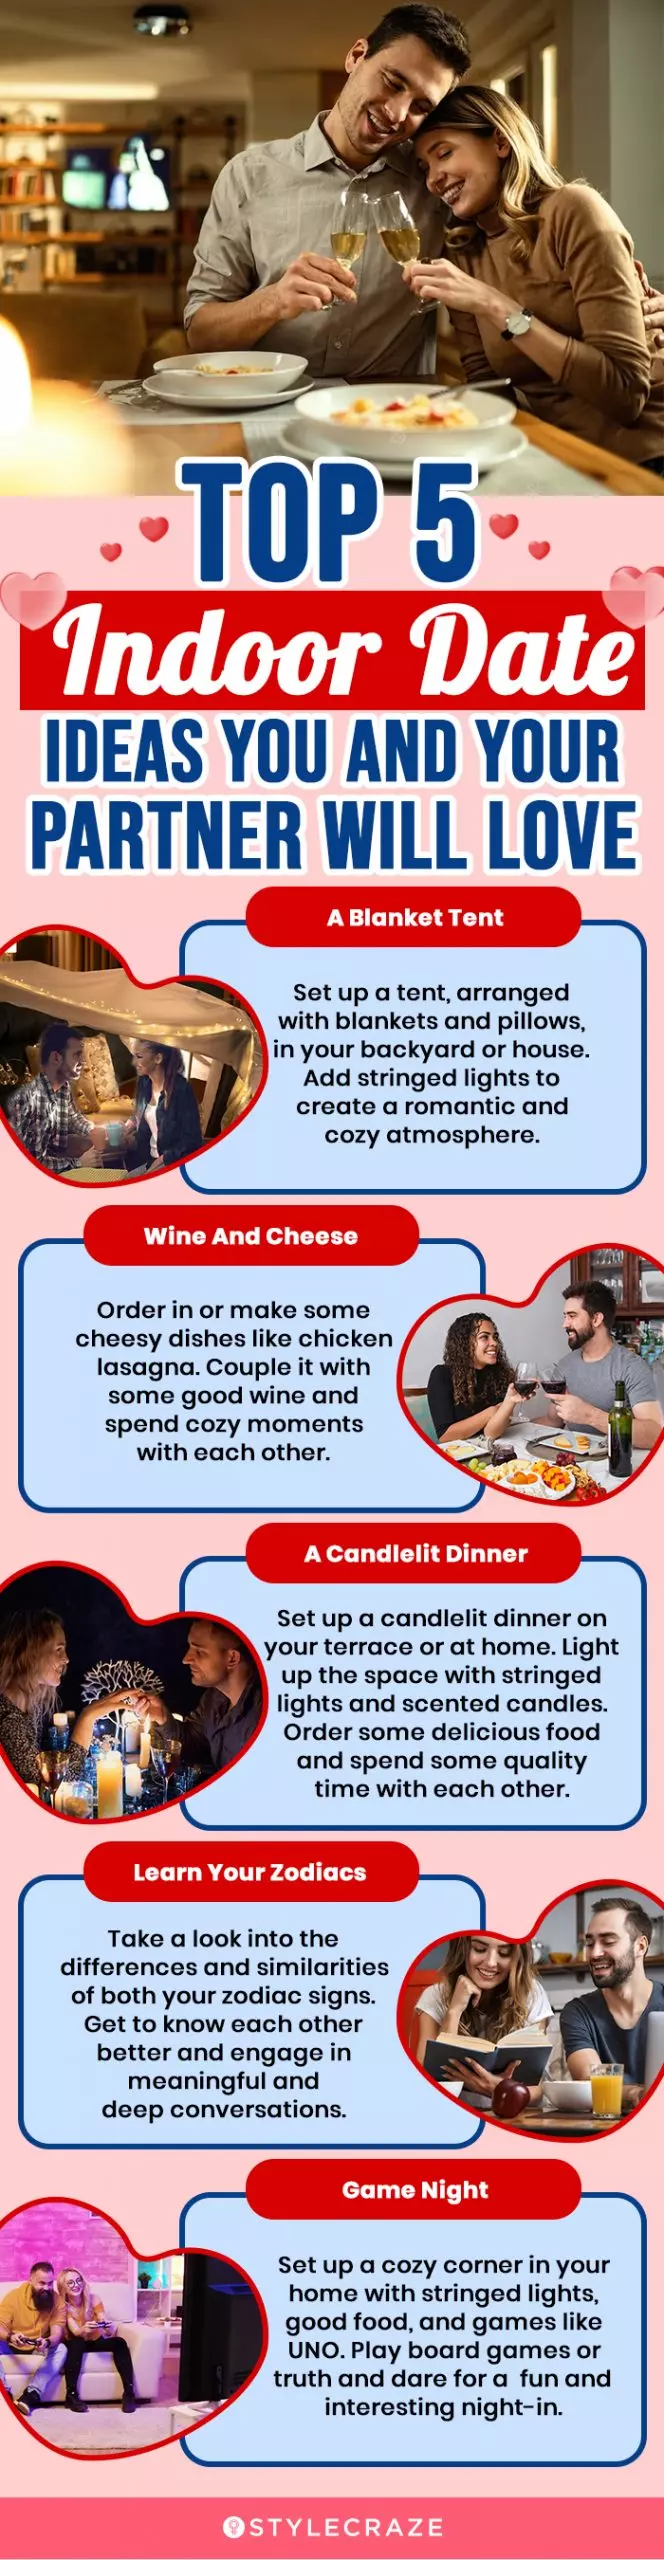 top 5 indoor date ideas you and your partner will love (infographic)